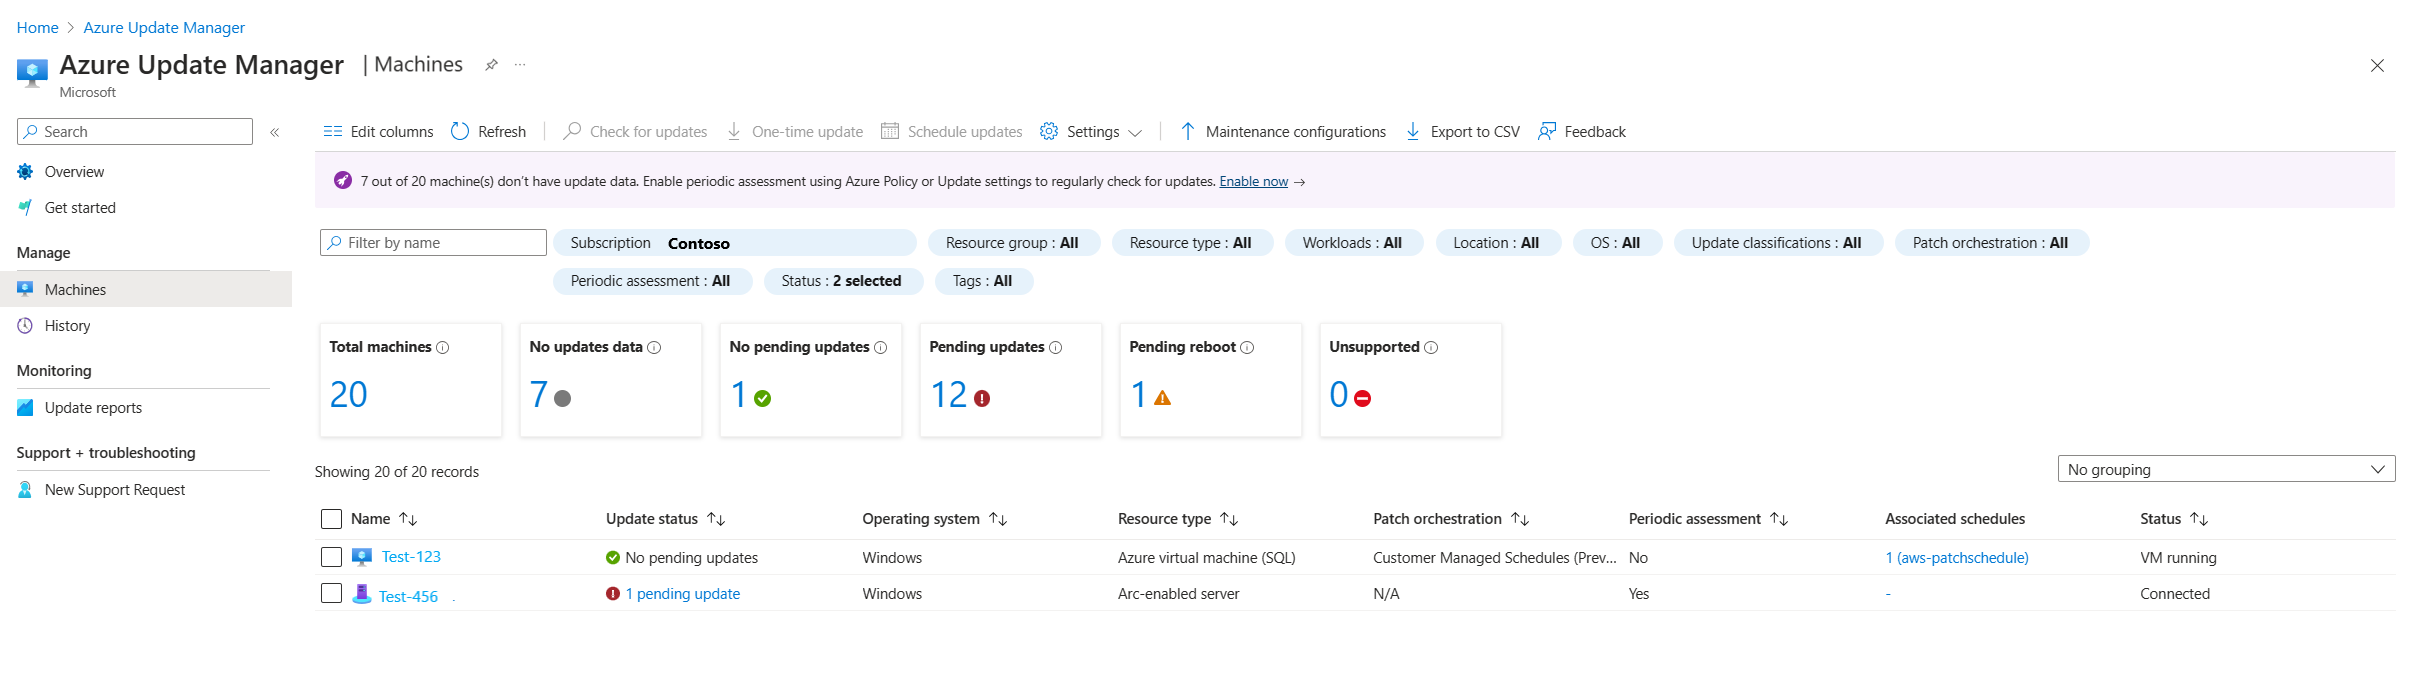 Screenshot that shows the Update Manager Machines page in the Azure portal.